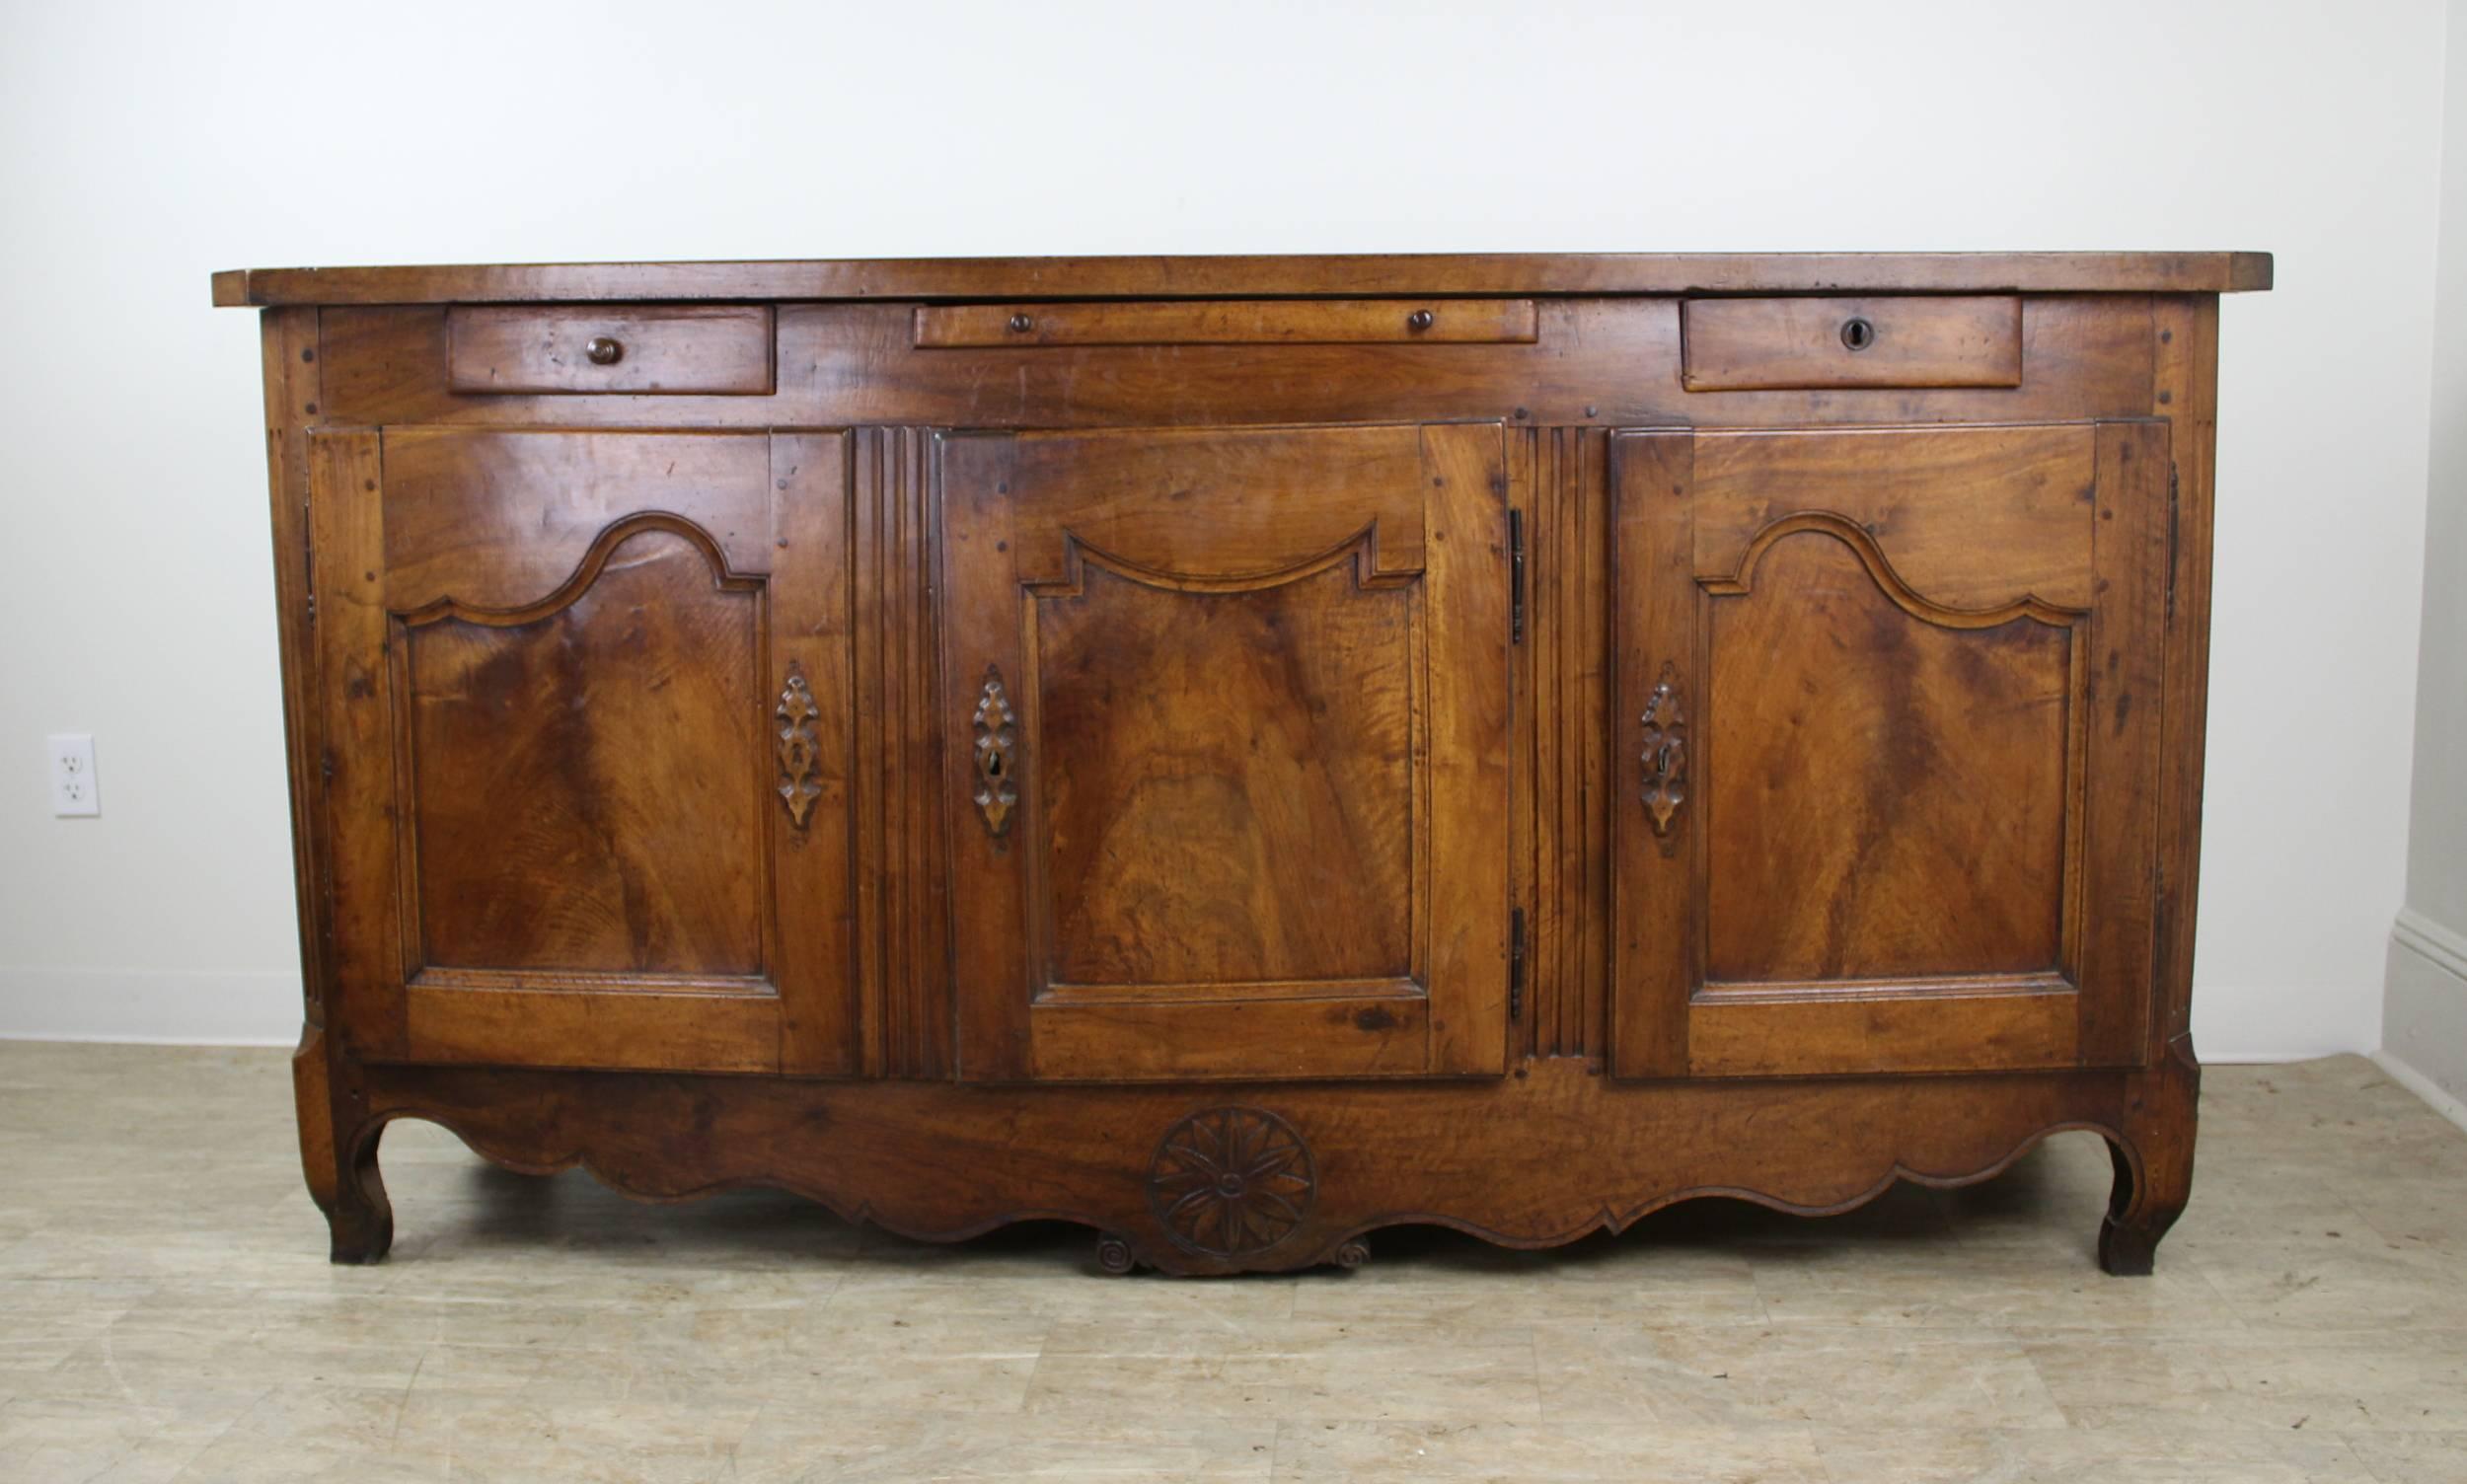 A handsome and imposing French walnut enfilade with interesting design detail and decorative carving at the well shaped apron. Graceful carved wood escutcheons and decorative reeding at the corners add another degree of period design interest. In